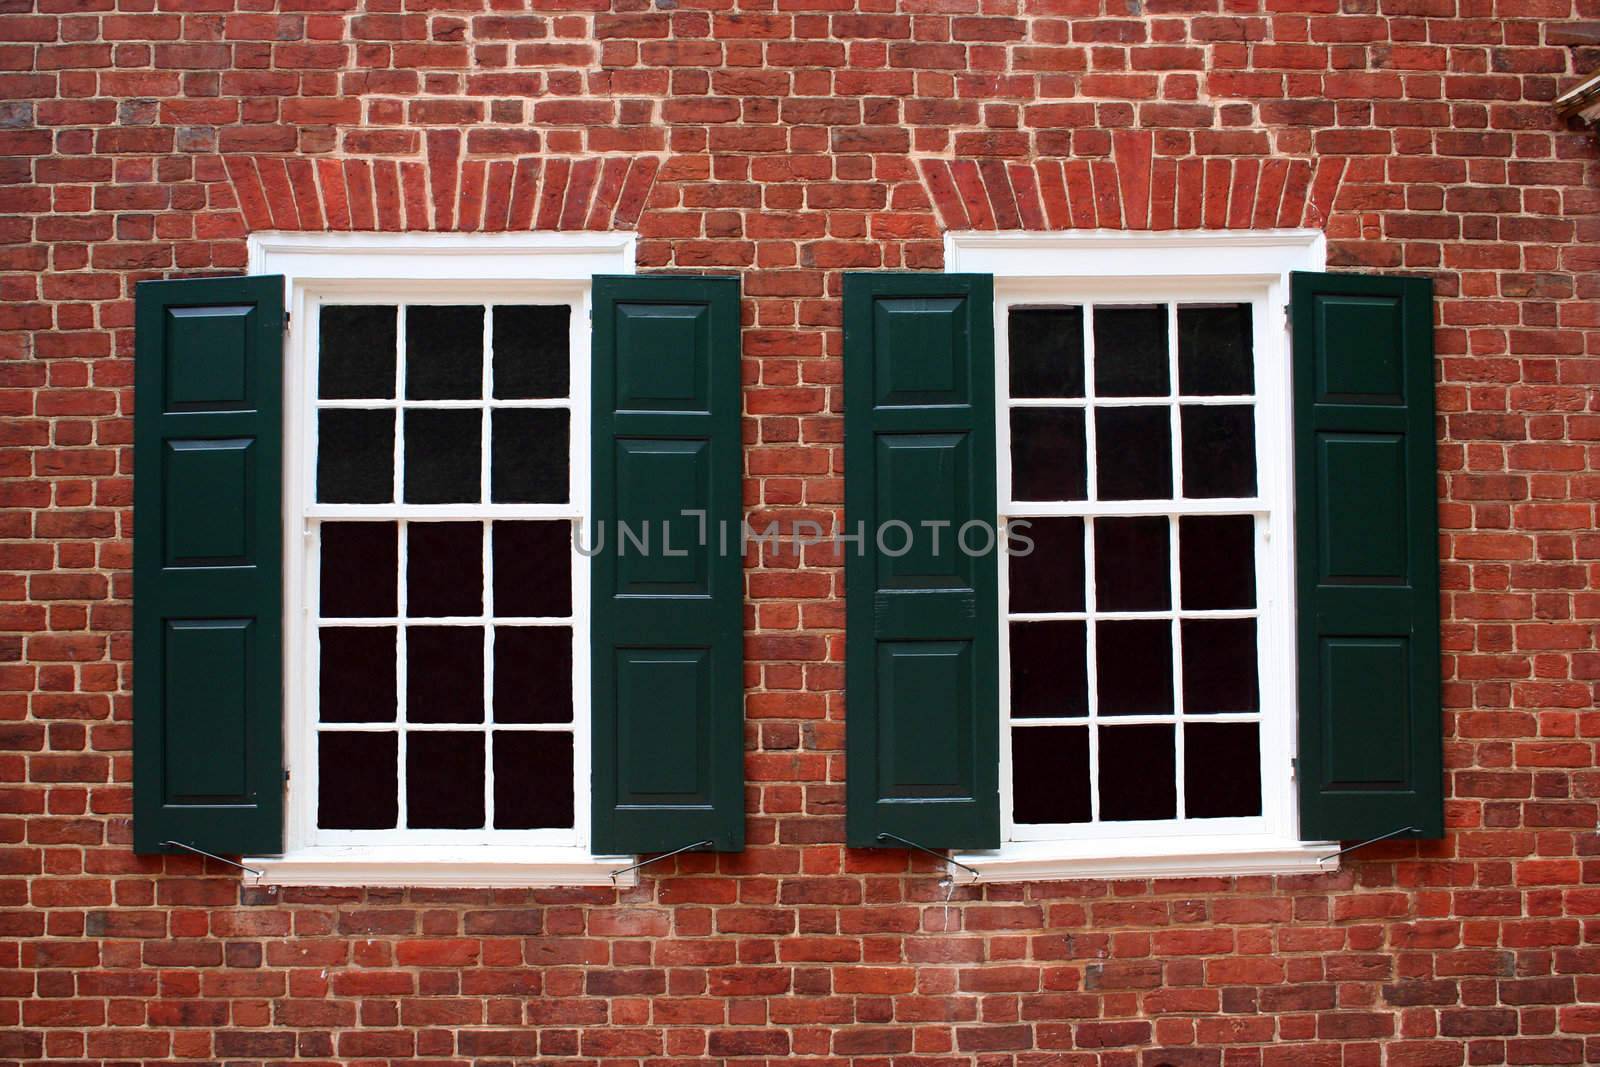 Windows on a building built in the late 1700s.